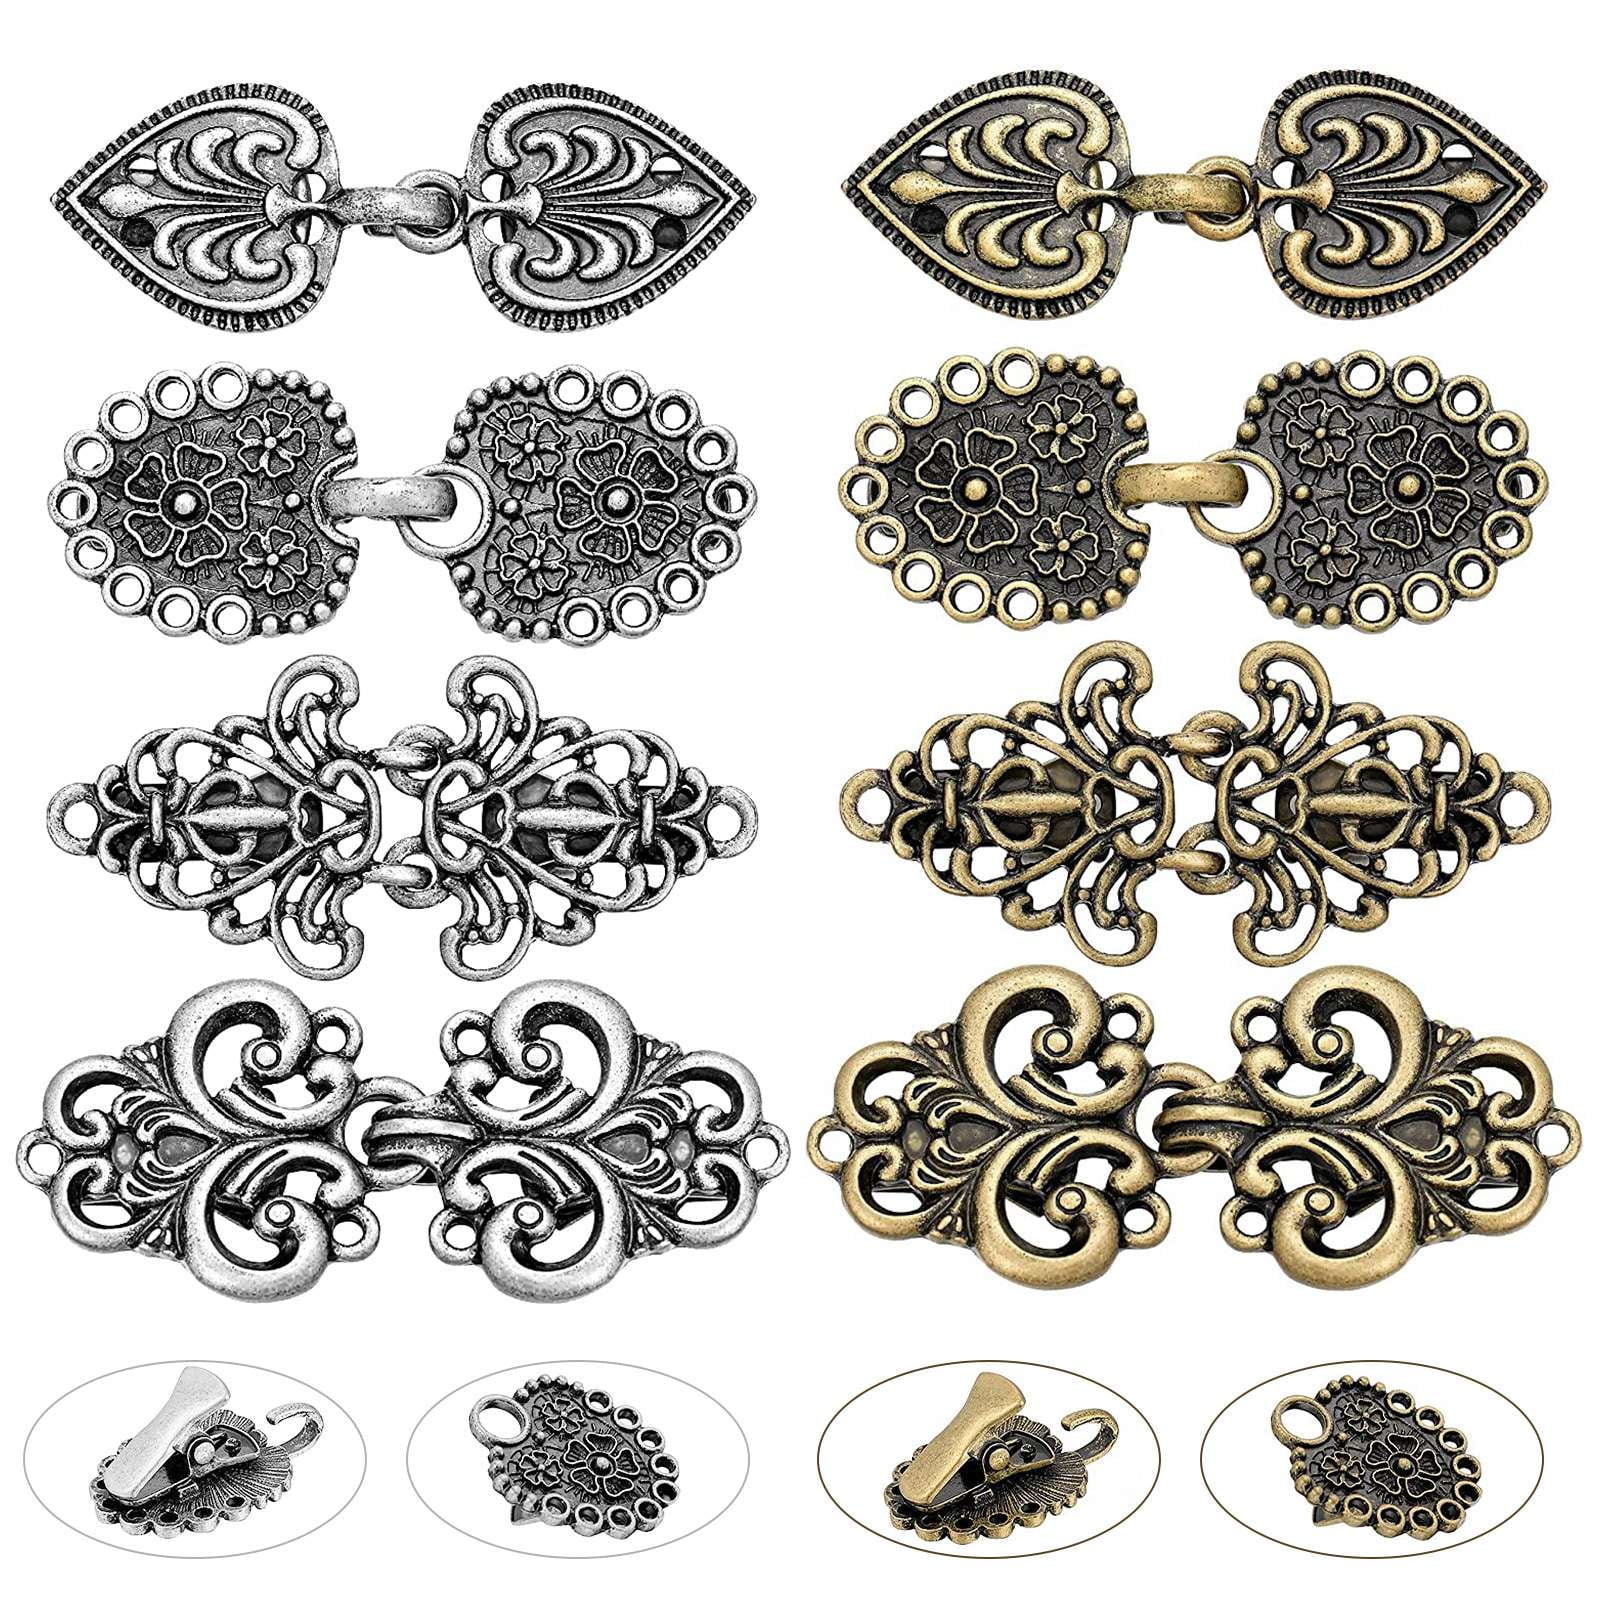 6 Pcs Vintage Cardigan Clips Flower Butterfly Shirt Scarf Clip Brooch Dress  Clips Back Cinch Retro Sweater Clasp Collar Chain Clips Gold Silver